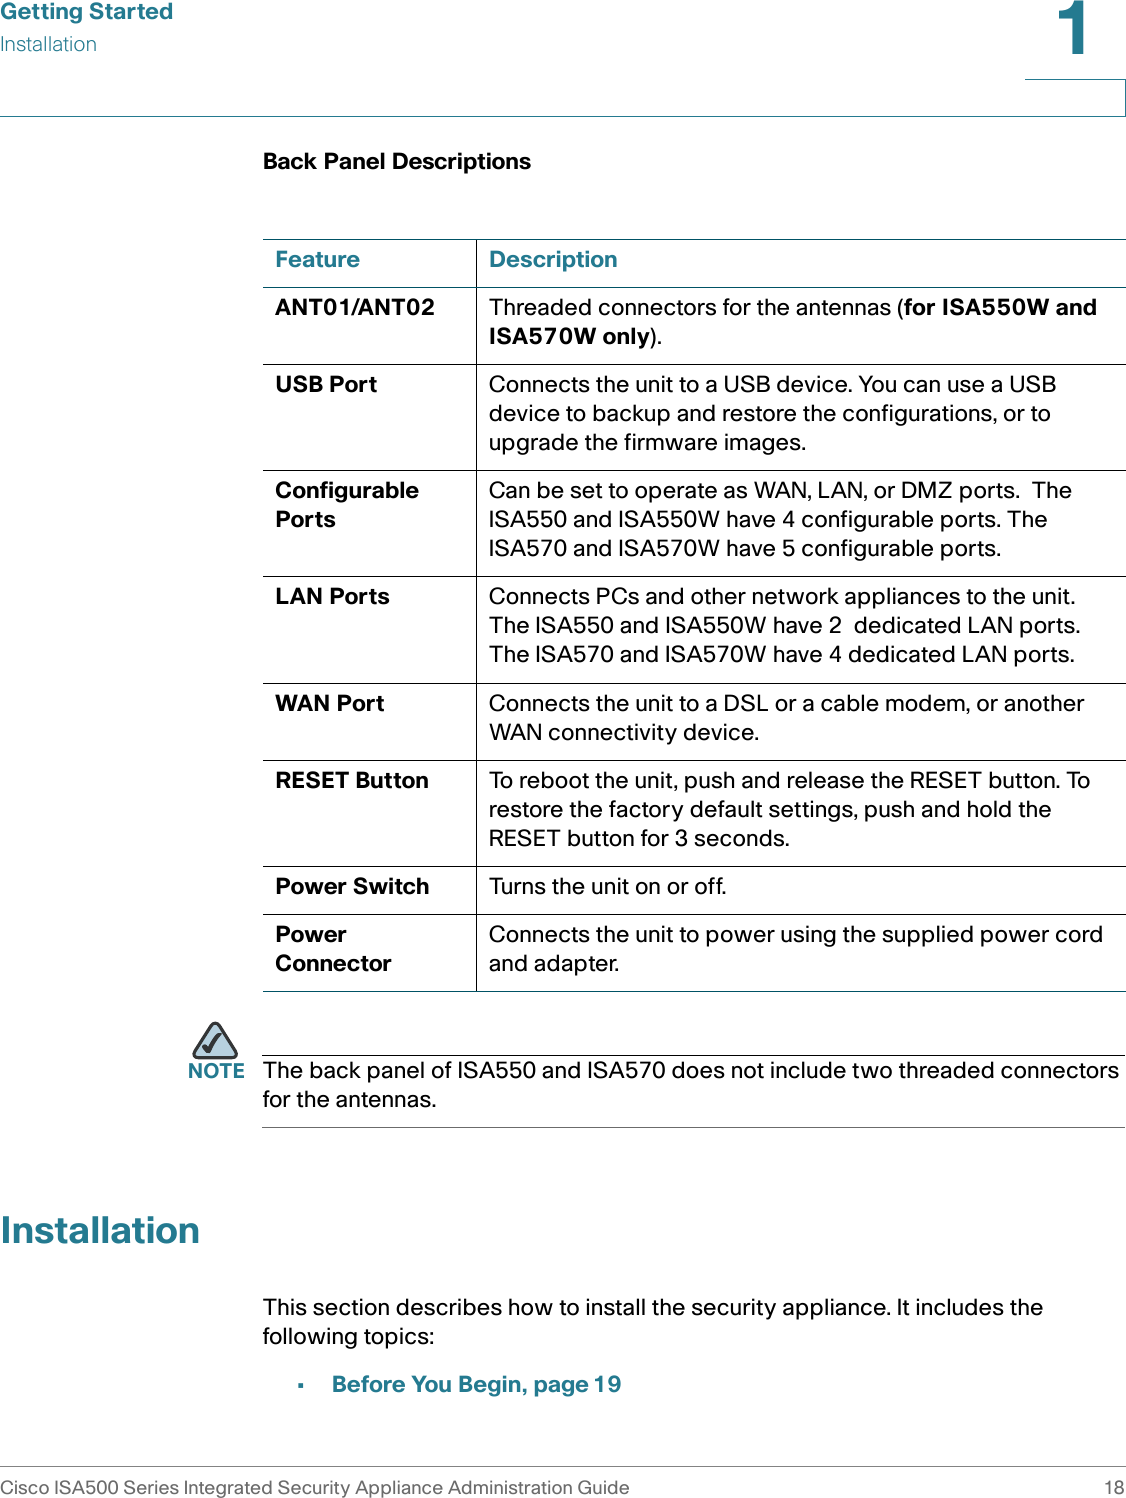 Getting StartedInstallationCisco ISA500 Series Integrated Security Appliance Administration Guide 181 Back Panel DescriptionsNOTE The back panel of ISA550 and ISA570 does not include two threaded connectors for the antennas.InstallationThis section describes how to install the security appliance. It includes the following topics:•Before You Begin, page 19Feature DescriptionANT01/ANT02 Threaded connectors for the antennas (for ISA550W and ISA570W only). USB Port Connects the unit to a USB device. You can use a USB device to backup and restore the configurations, or to upgrade the firmware images.Configurable PortsCan be set to operate as WAN, LAN, or DMZ ports.  The ISA550 and ISA550W have 4 configurable ports. The ISA570 and ISA570W have 5 configurable ports.LAN Ports Connects PCs and other network appliances to the unit. The ISA550 and ISA550W have 2  dedicated LAN ports. The ISA570 and ISA570W have 4 dedicated LAN ports.WAN Port Connects the unit to a DSL or a cable modem, or another WAN connectivity device.RESET Button To reboot the unit, push and release the RESET button. To restore the factory default settings, push and hold the RESET button for 3 seconds.Power Switch Turns the unit on or off.Power ConnectorConnects the unit to power using the supplied power cord and adapter.